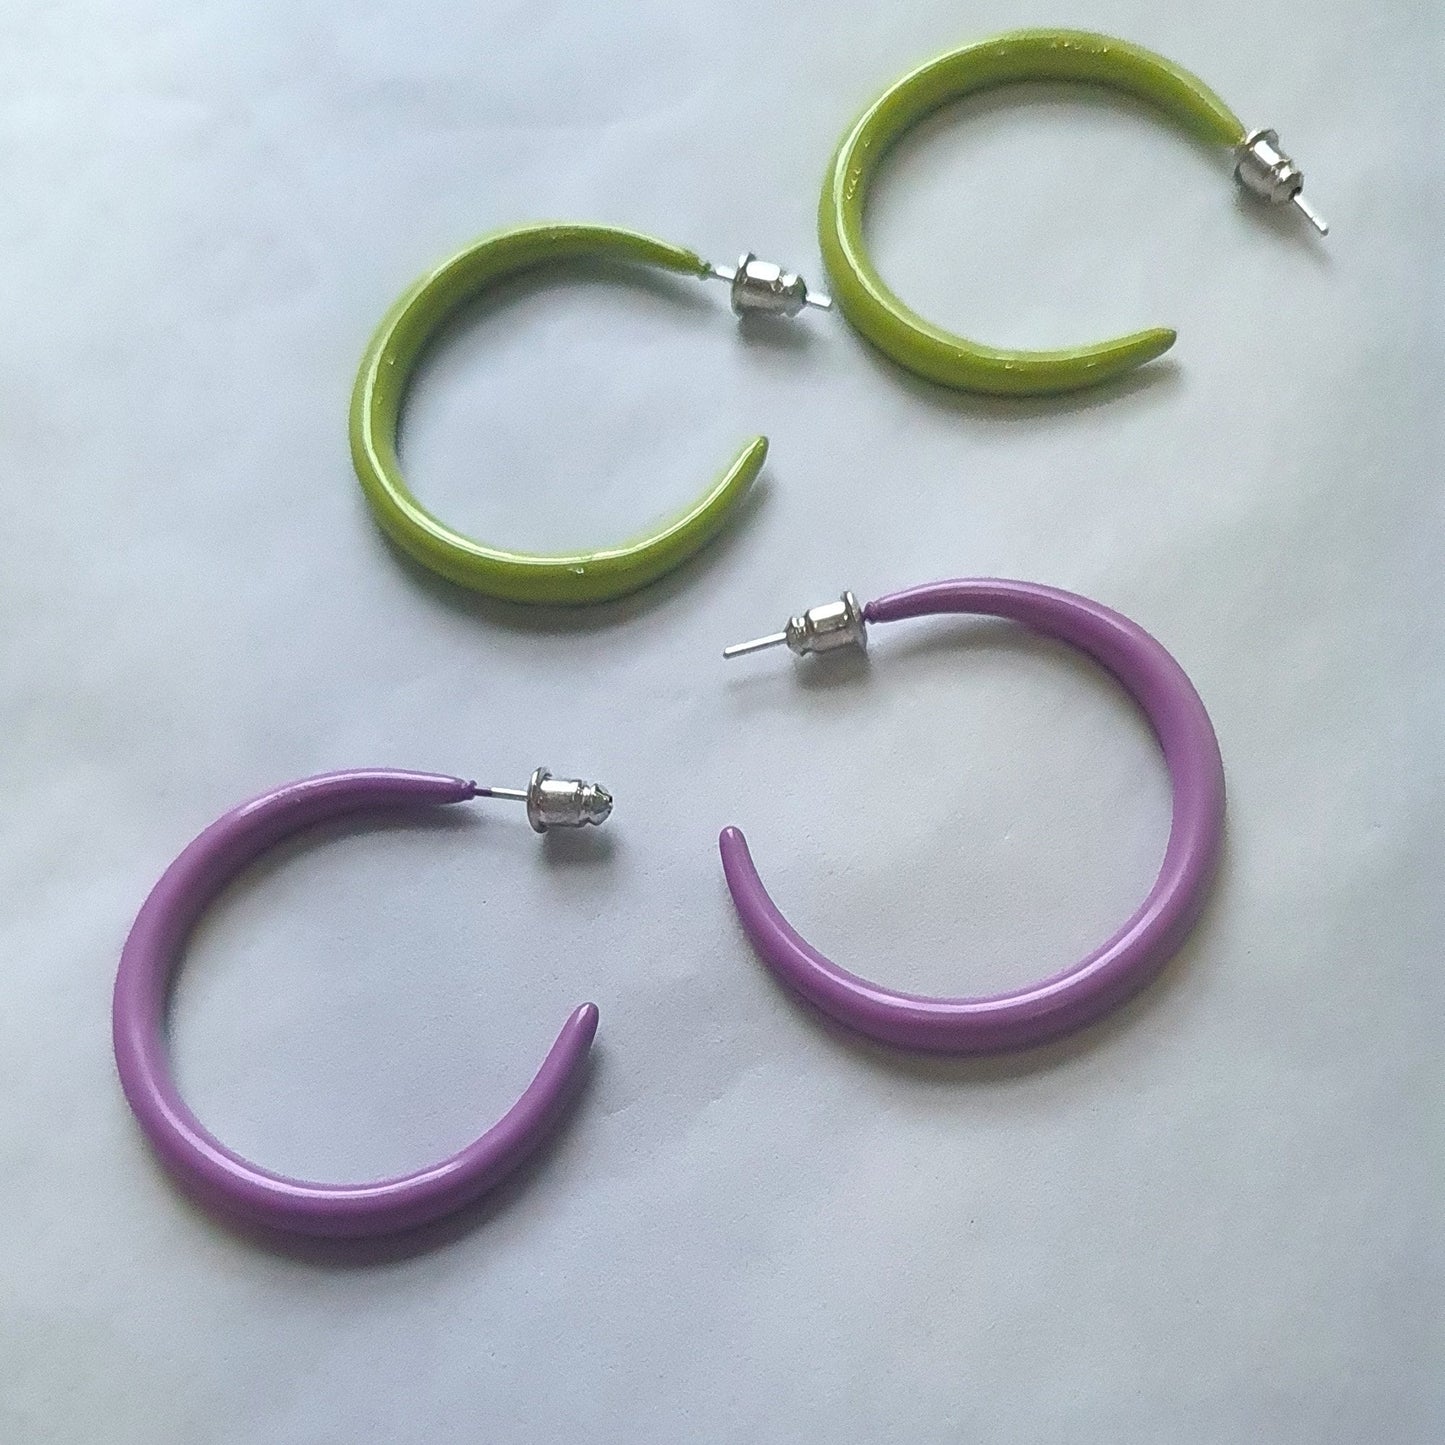 Large Acrylic Bright Green and Purple C Hoop Circle Earrings Colourful Earrings